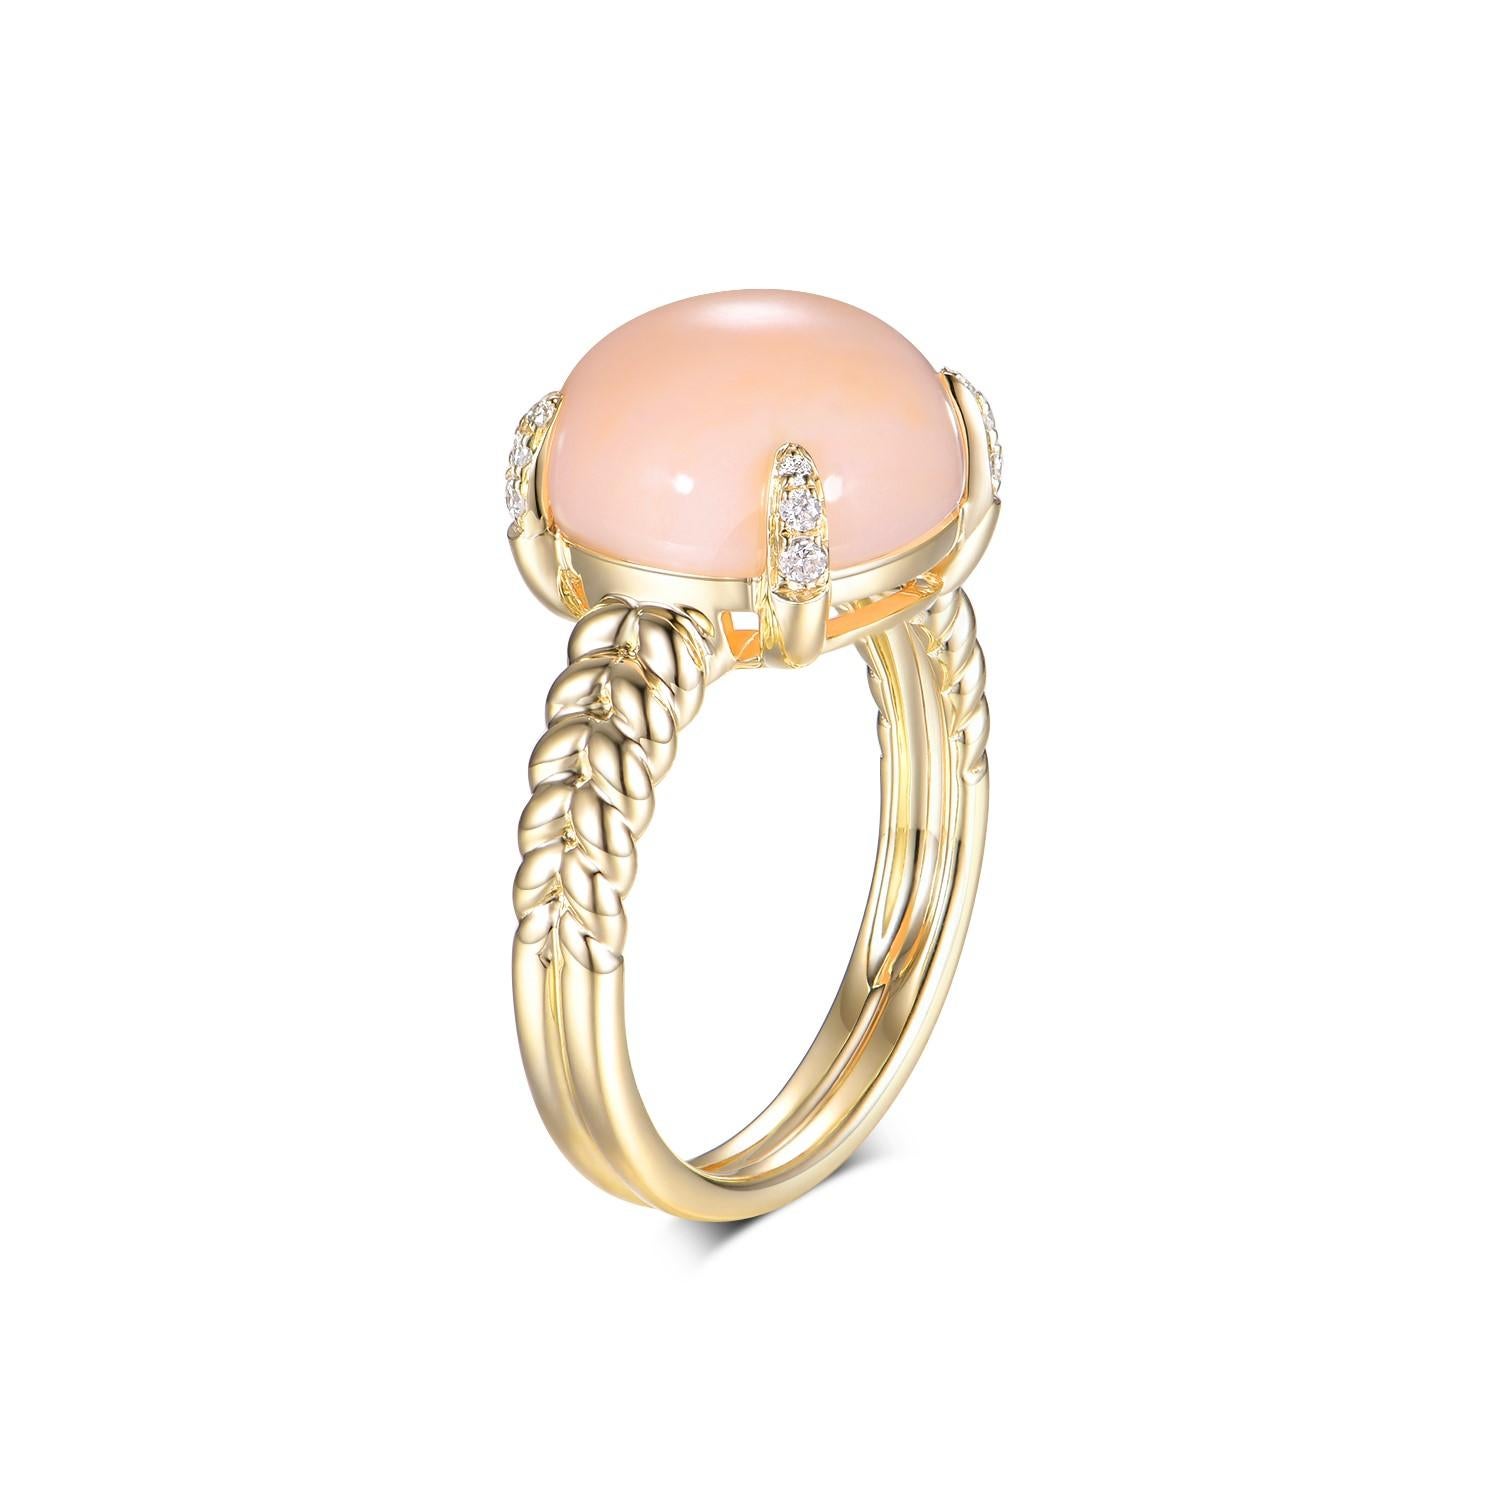 This ring is a stunning piece of jewelry crafted from 14-karat yellow gold, featuring a large, round coral center stone weighing 7.0 carats. The coral has a delicate pink hue that exudes a soft, warm glow, reminiscent of a serene sunset. Its smooth